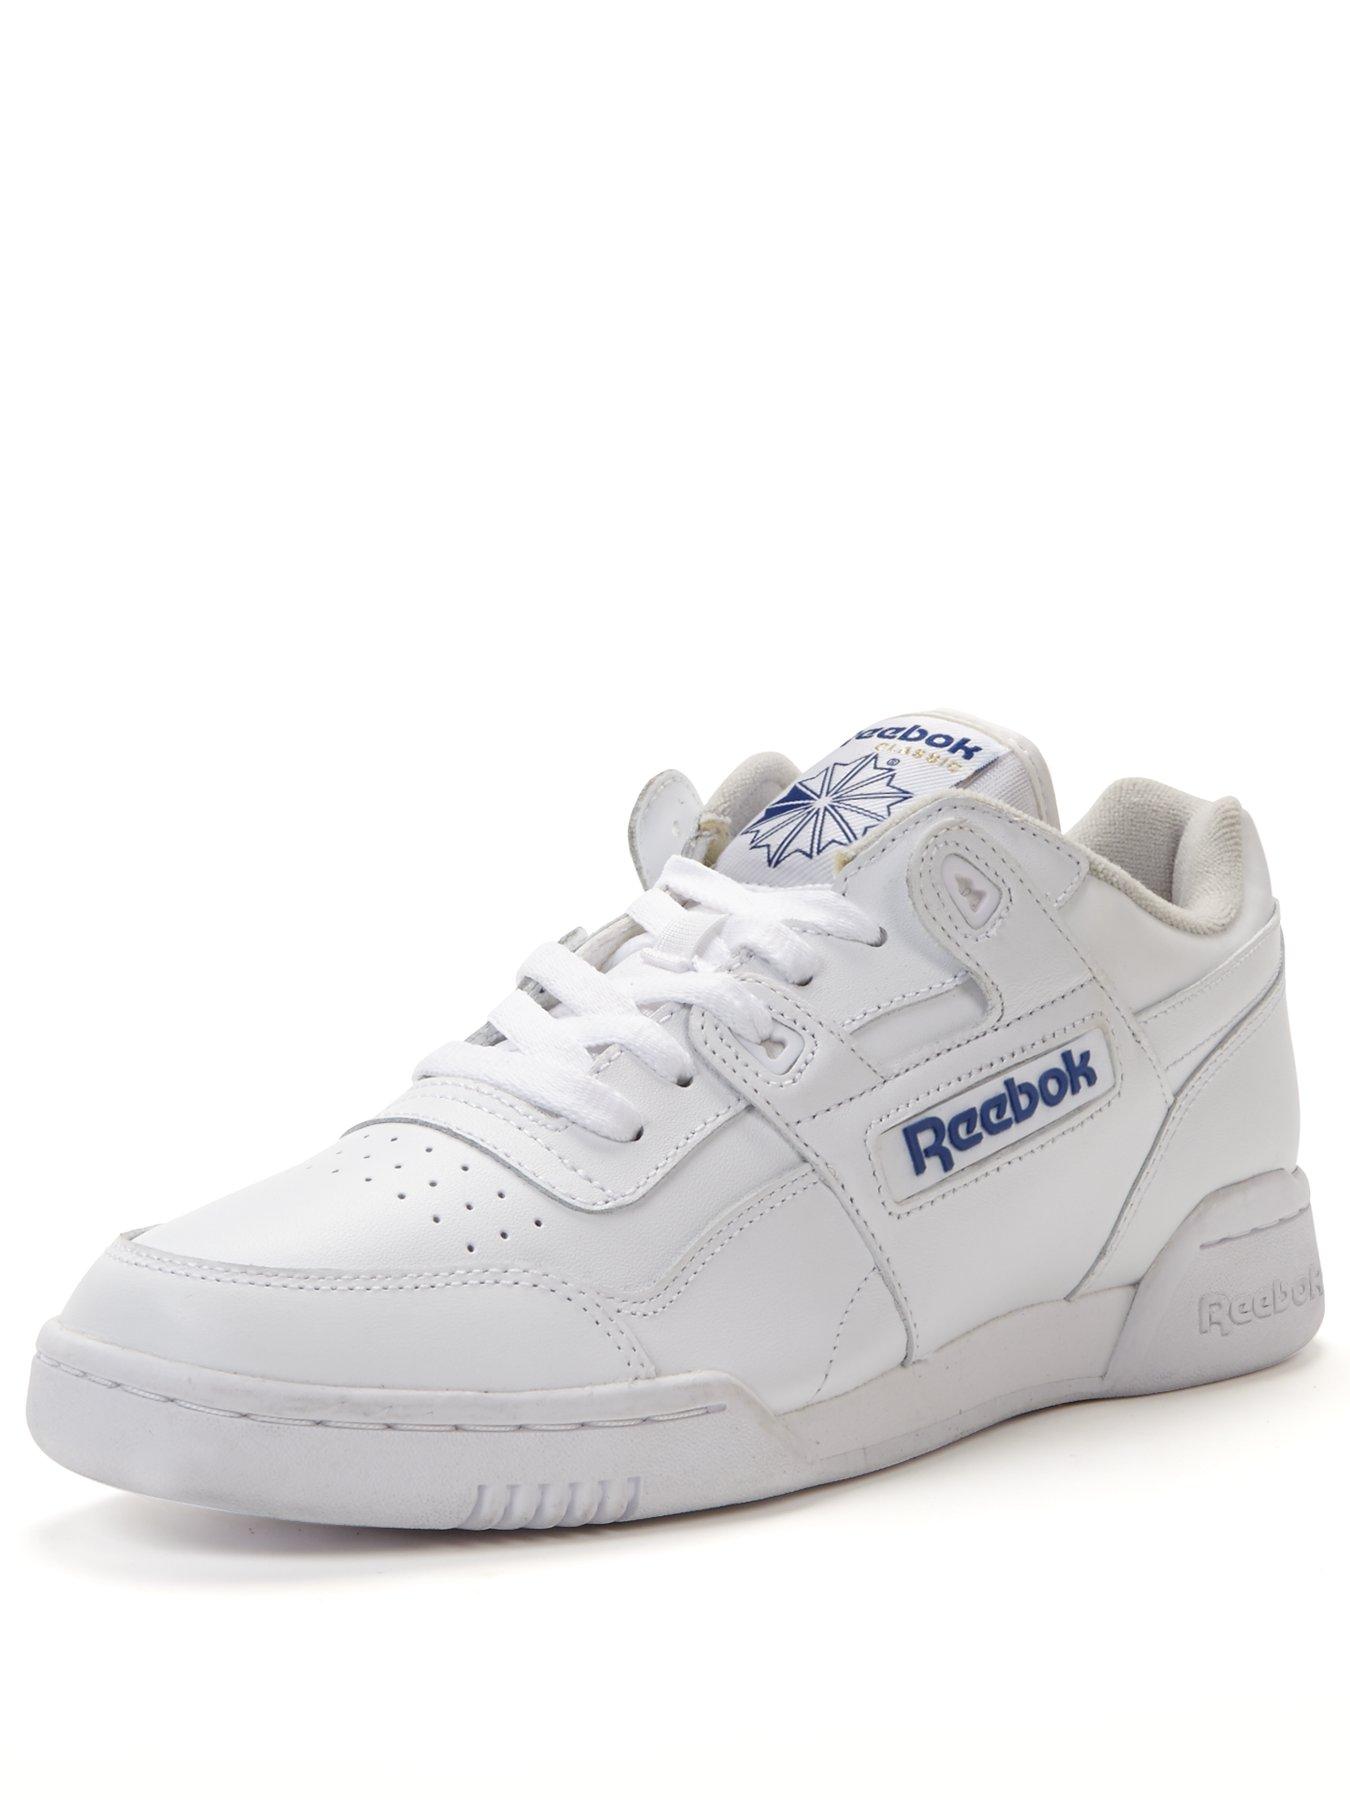 Reebok Workout Plus Trainers | very.co.uk